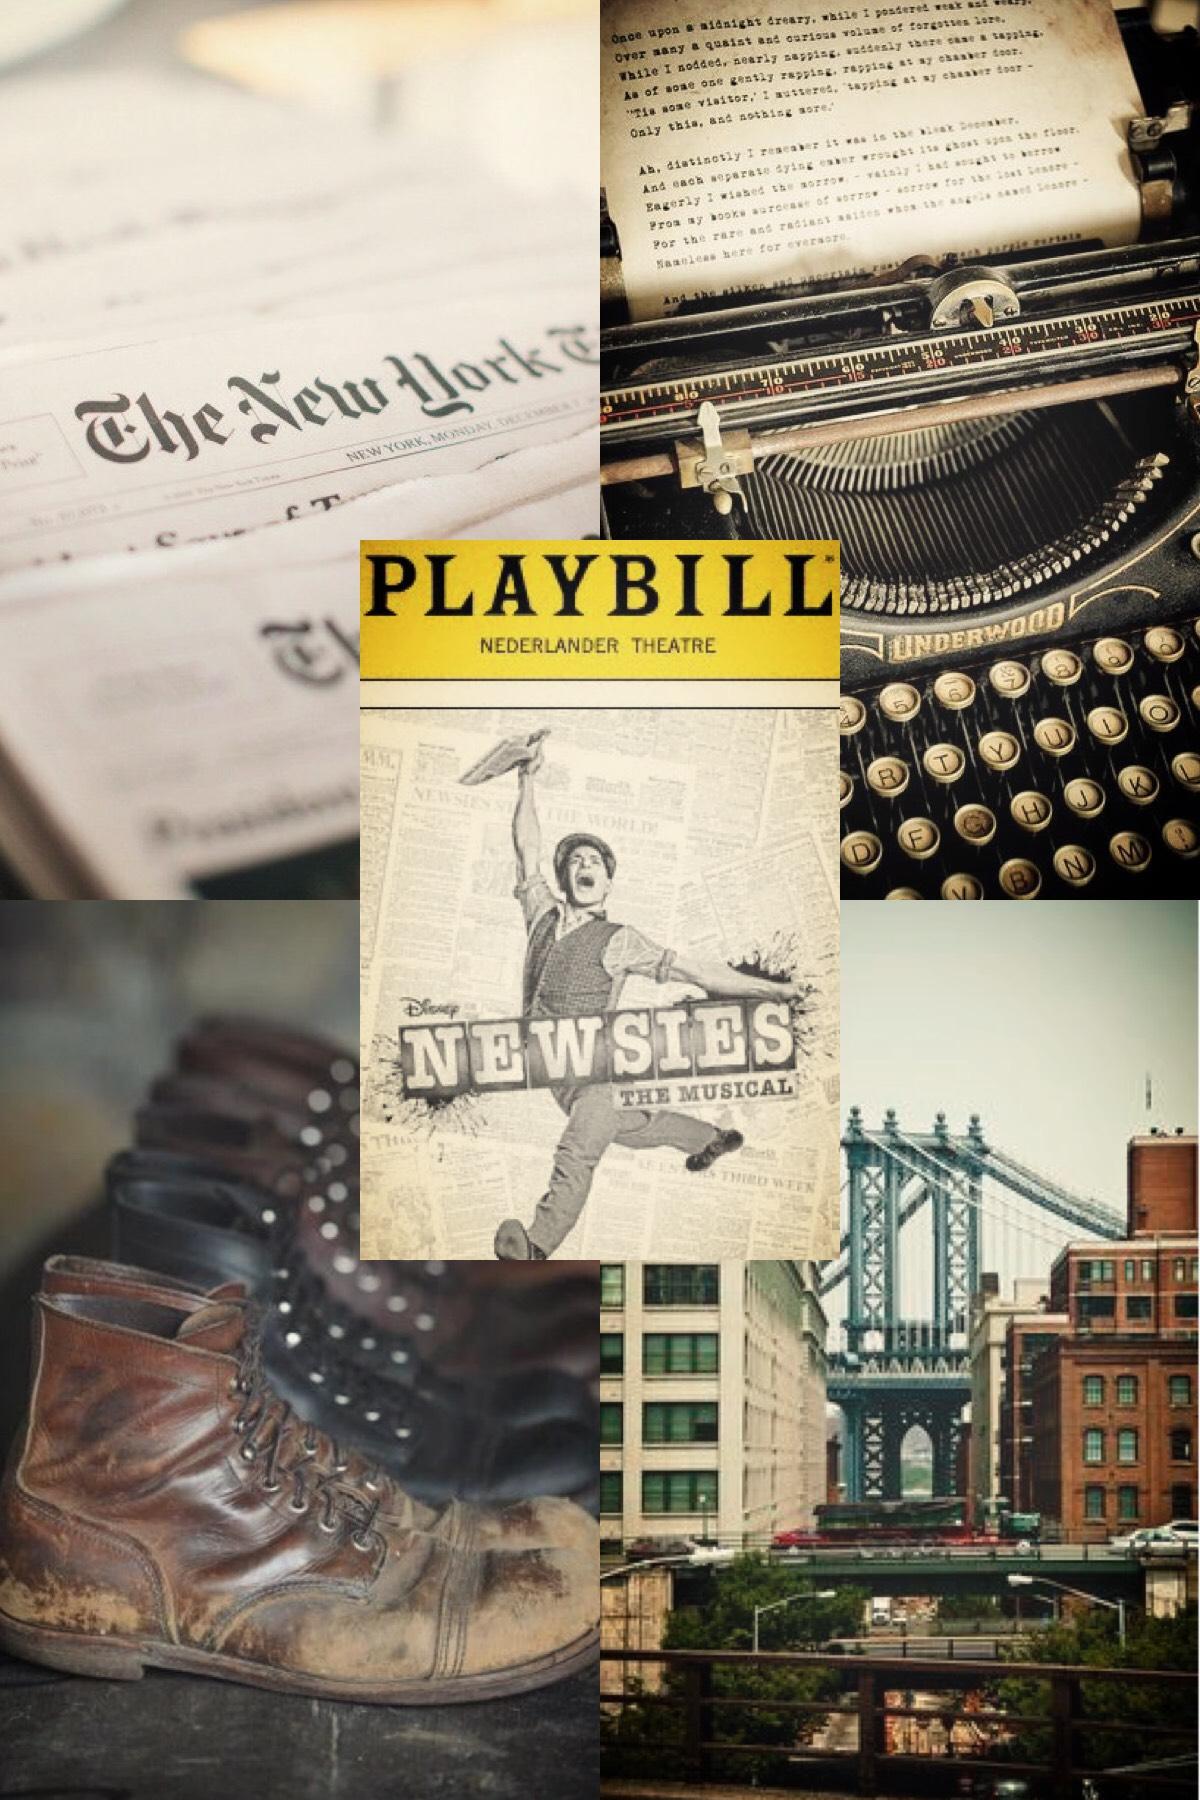 Some musical aesthetics coming up for all y’all Broadway fans!!! 
-
Here’s an aesthetic of Newsies, my favorite Broadway musical!